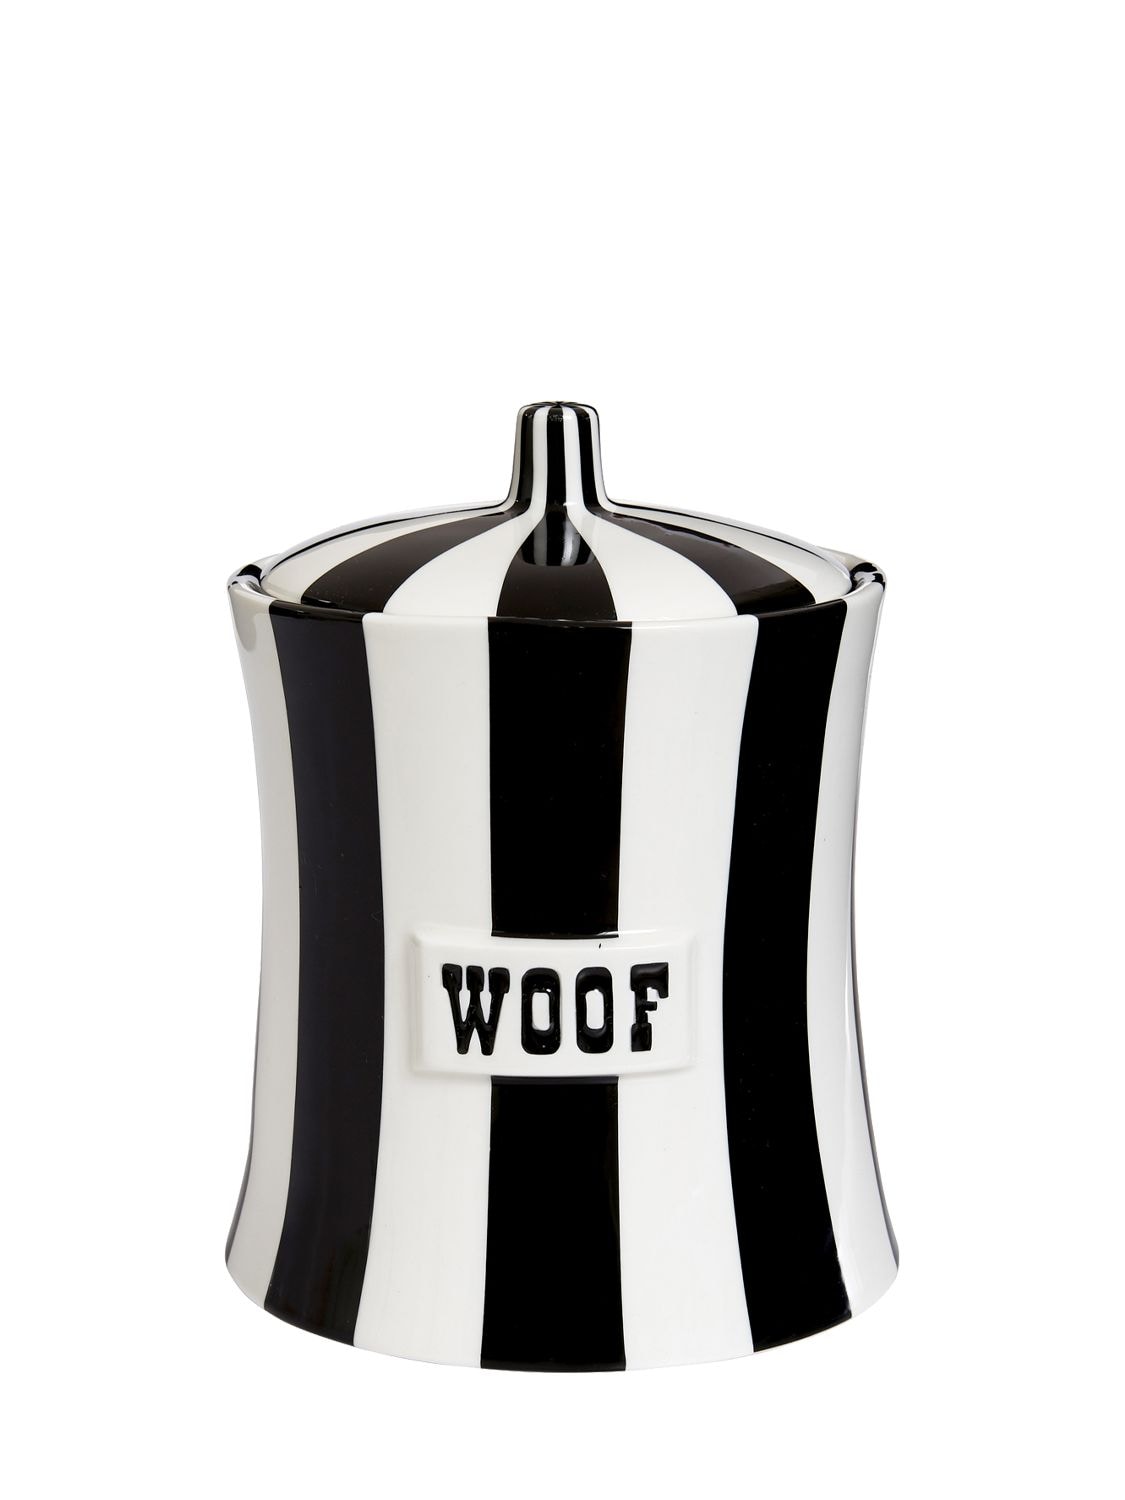 Jonathan Adler Woof Vice Cannister In Black